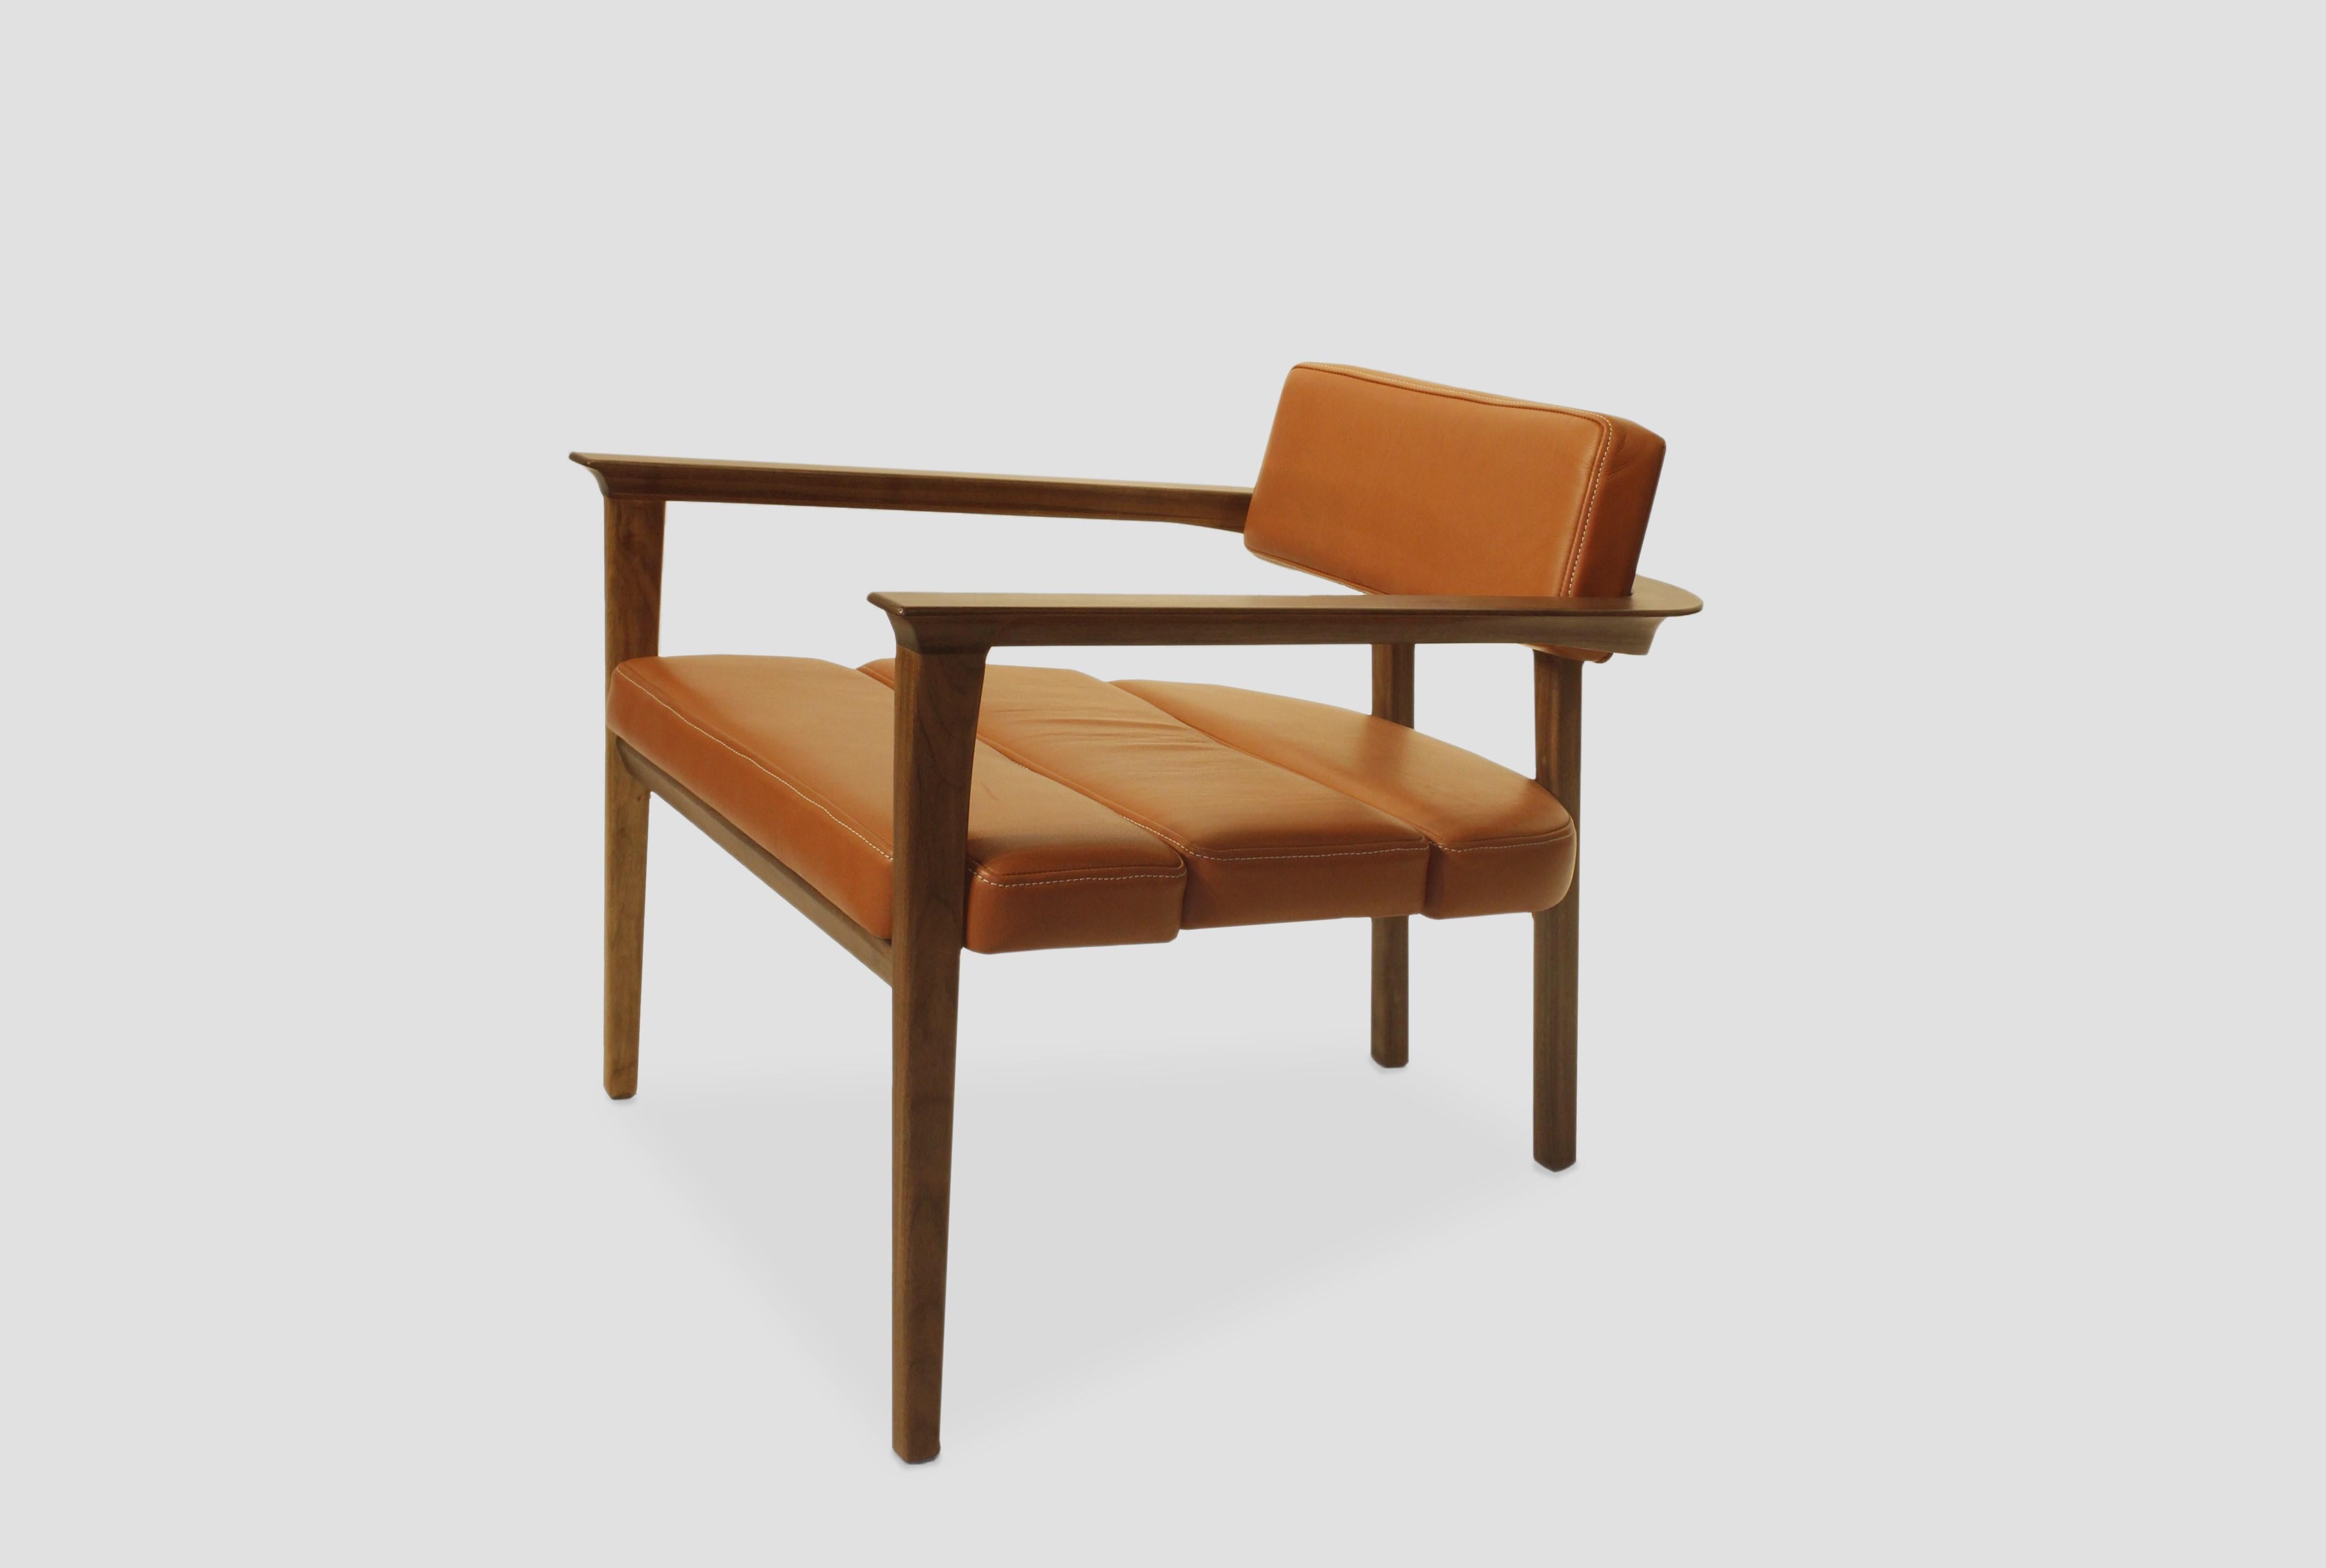 Klee armchair by Arturo Verástegui
Dimensions: D 72 x W 76 x H 70 cm
Materials: walnut wood, leather.

Armchair made of solid holm walnut, leather.

Arturo Verástegui has been the director and founder of BREUER since 2015. Arturo began his